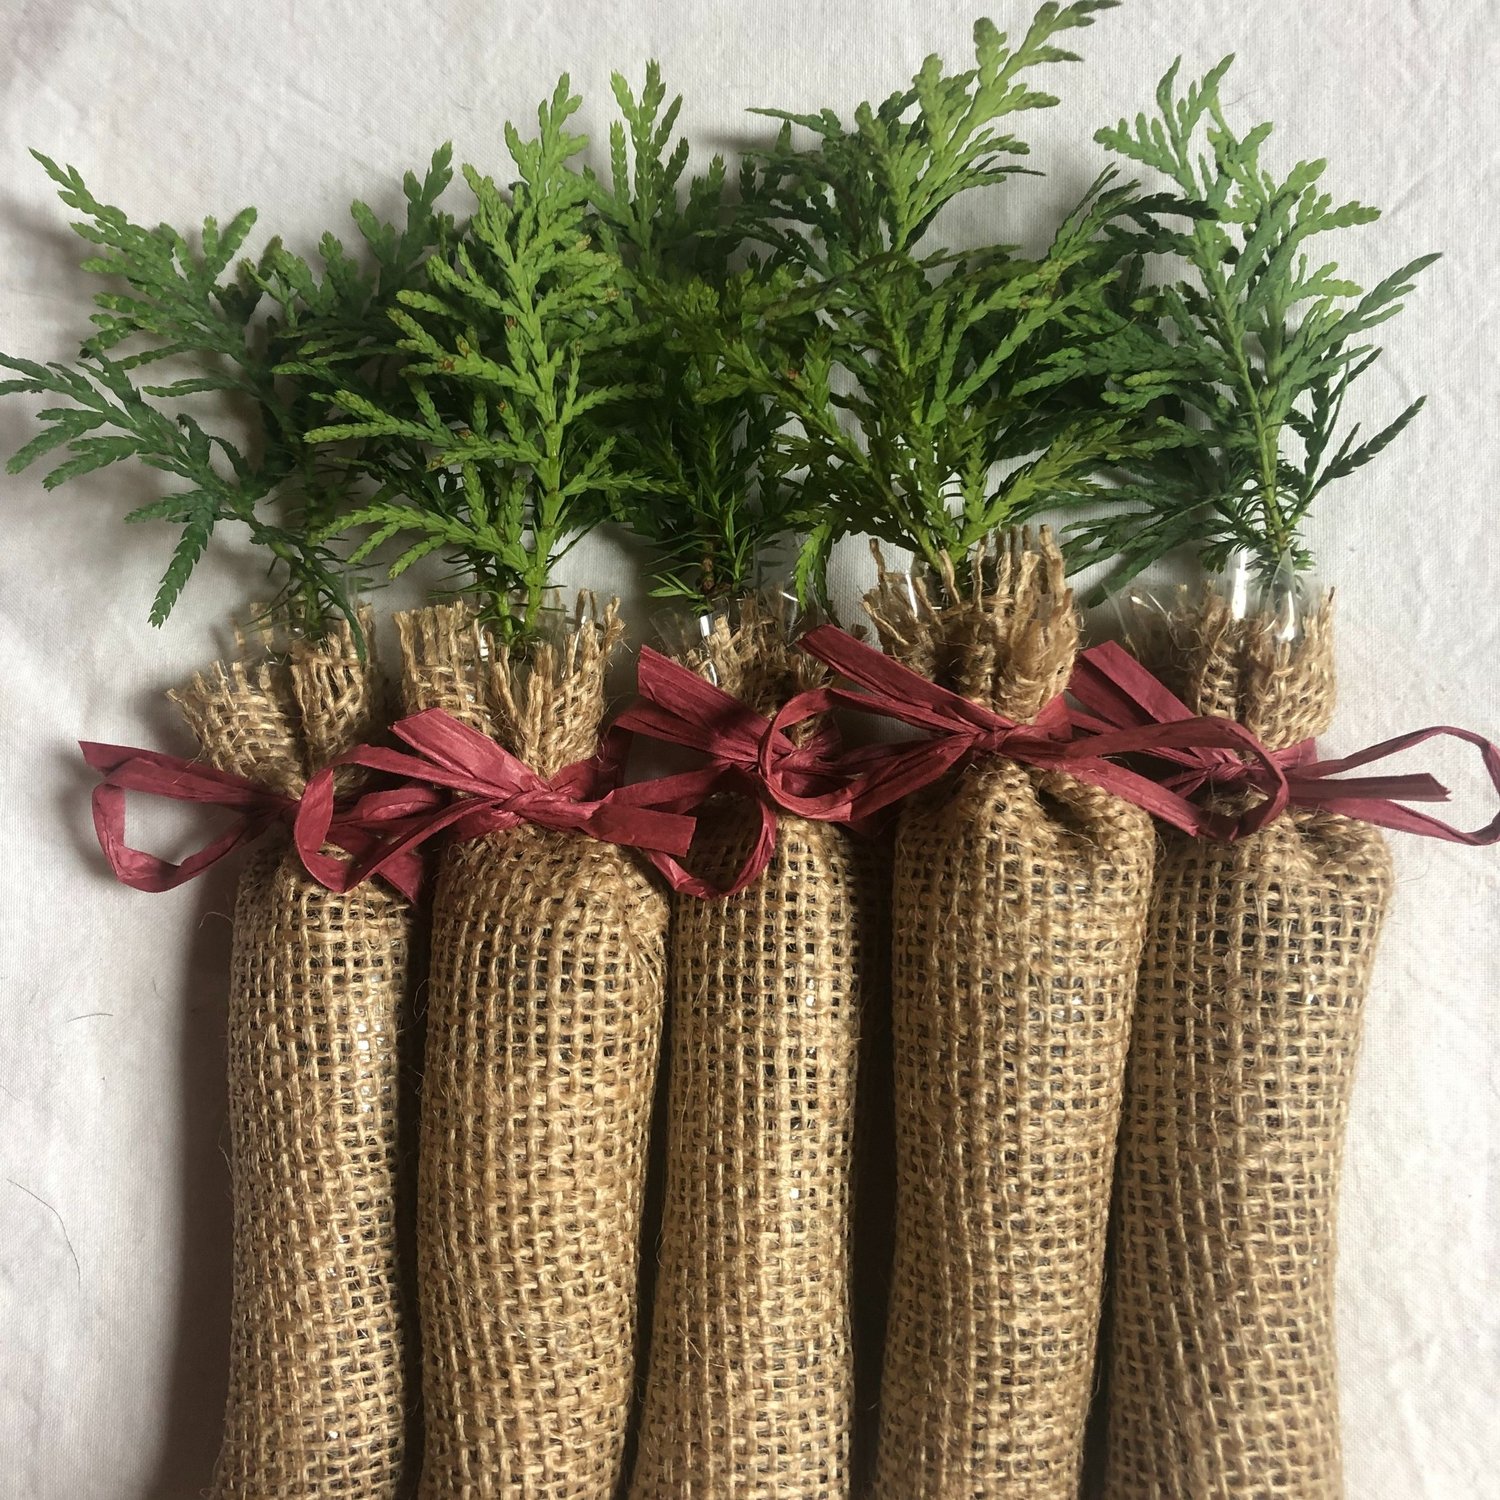 Trees Wrapped In Burlap – Tips On Planting A Balled And Burlapped Tree